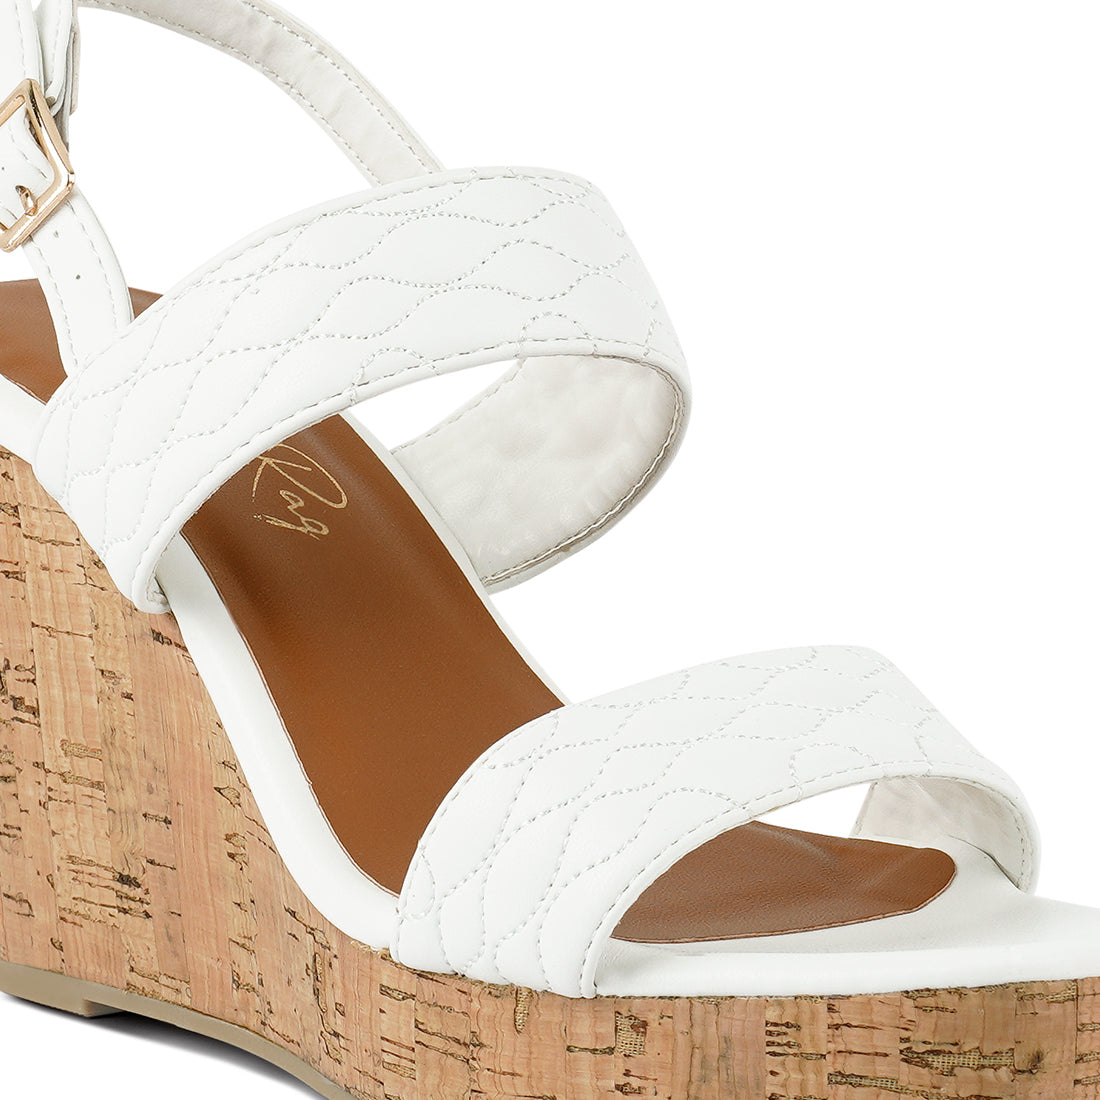 White Quilted High Wedge Heel Sandals